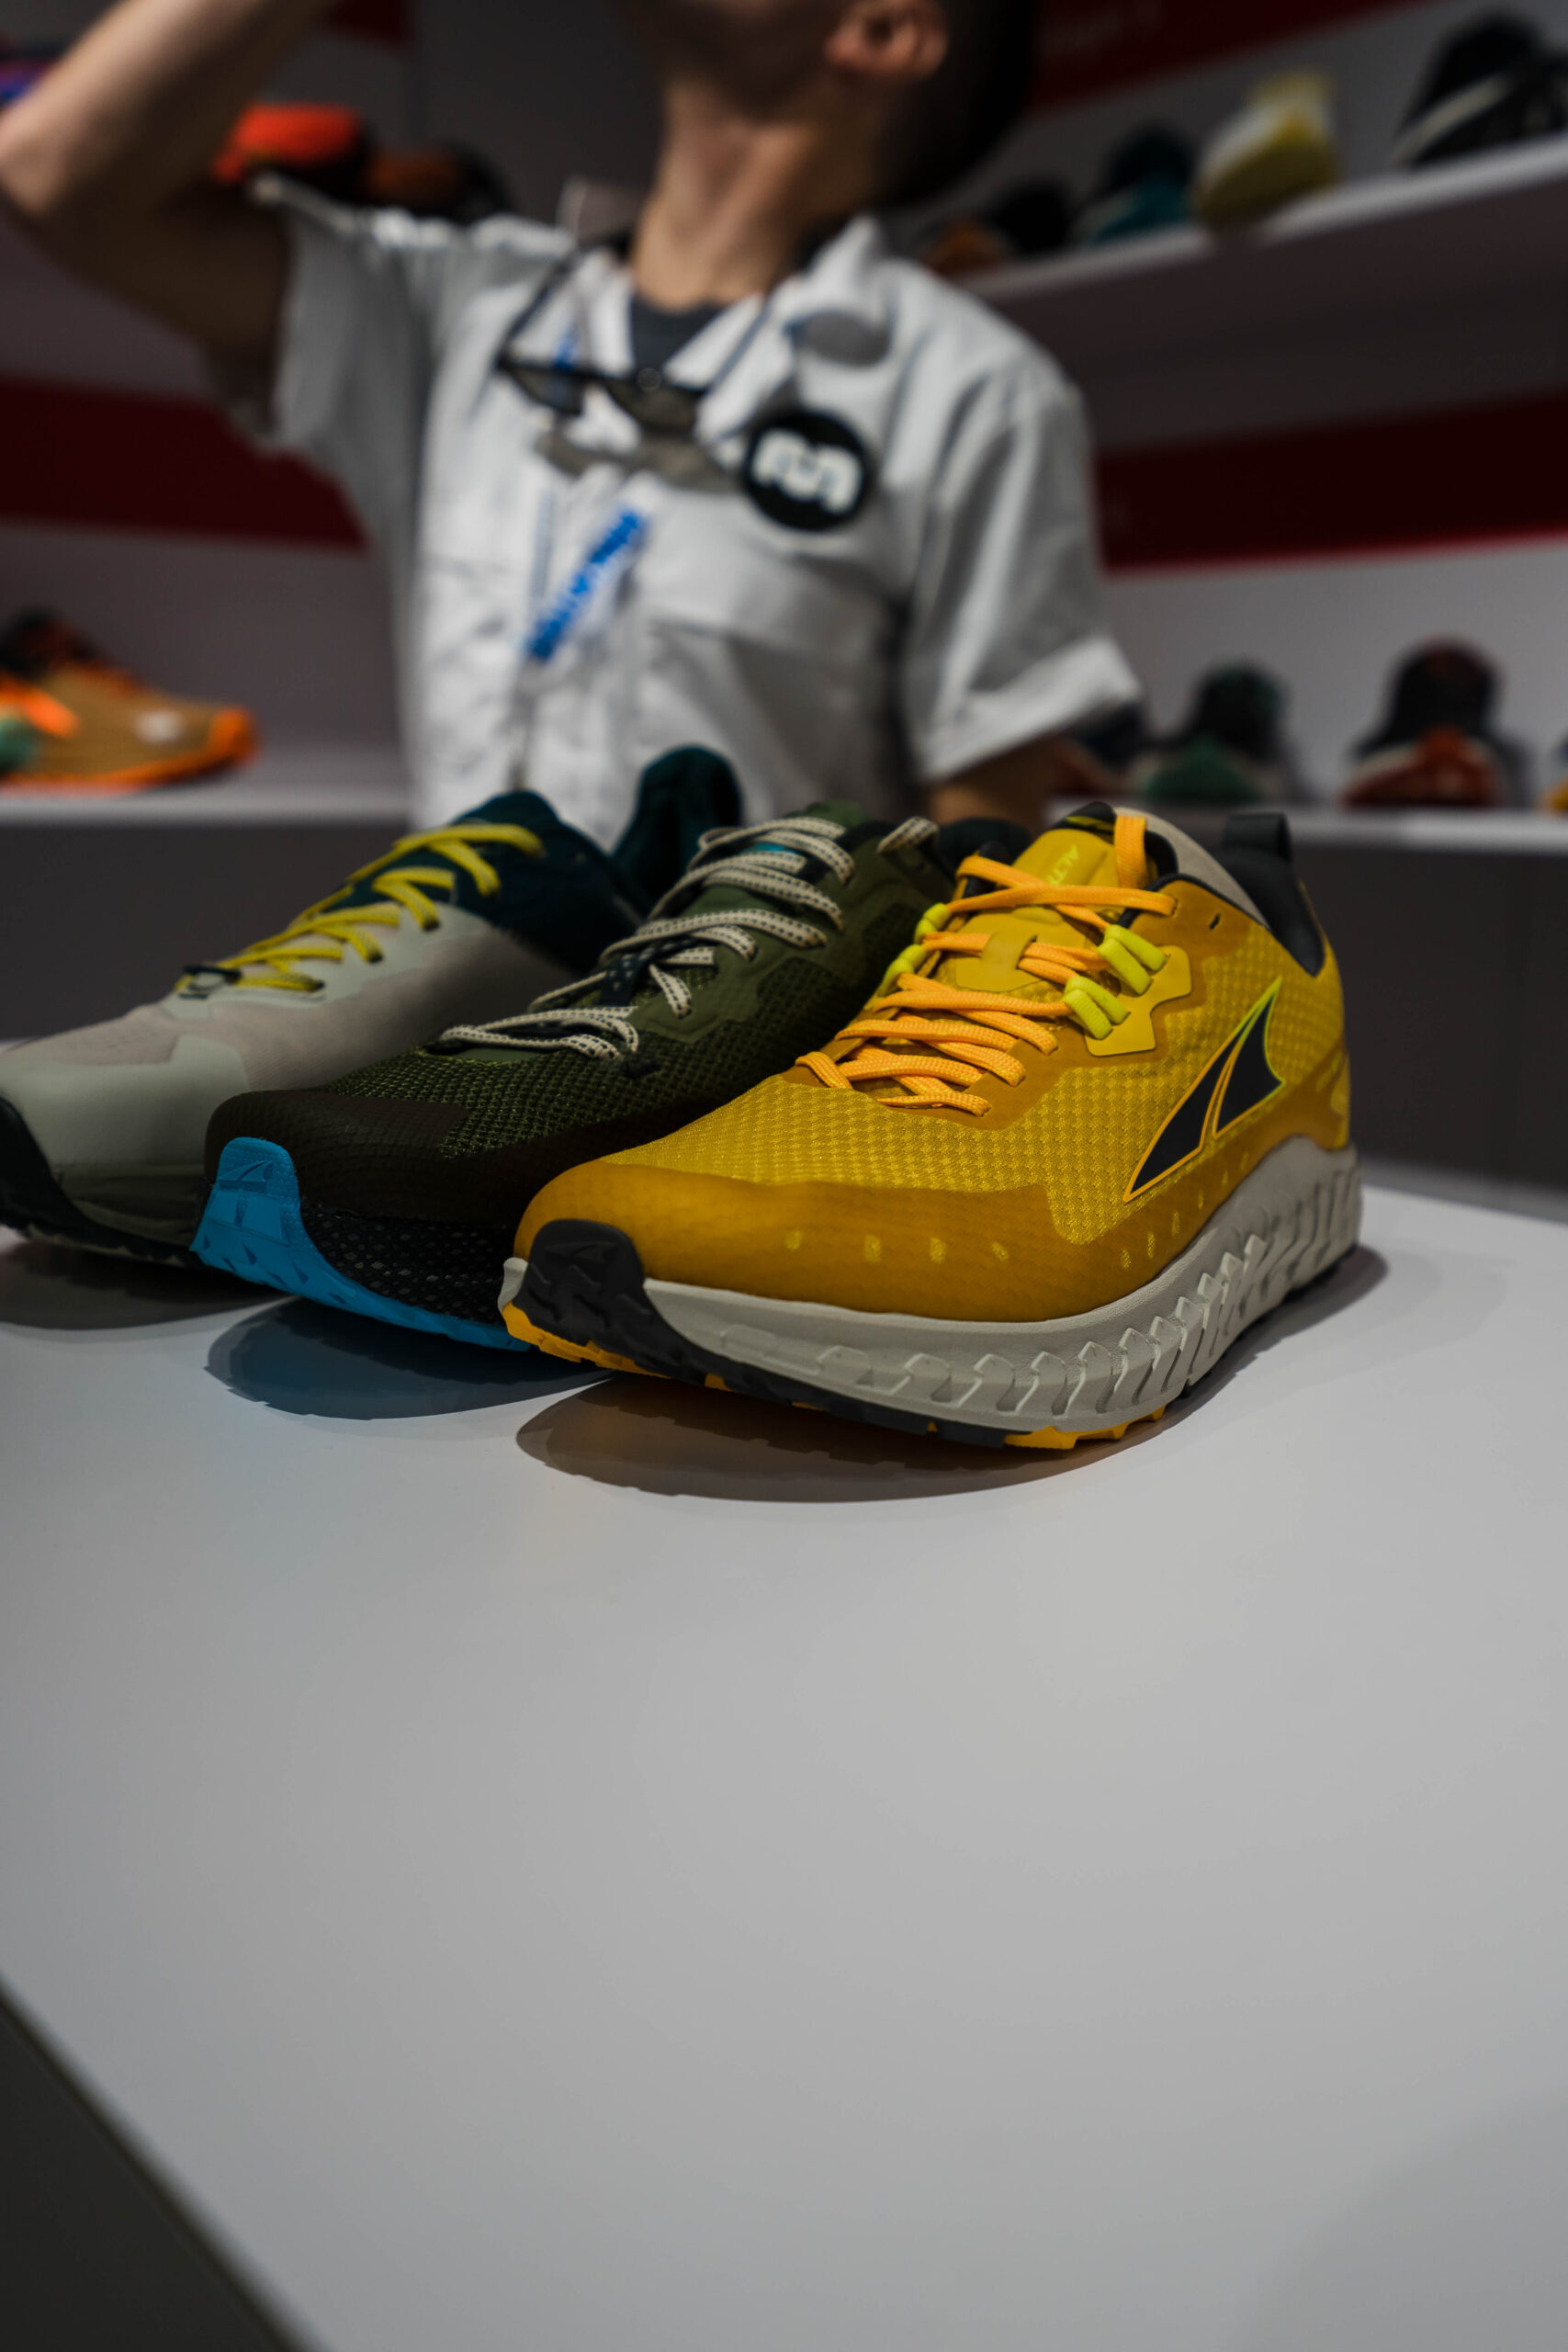 altra shoes at the running event